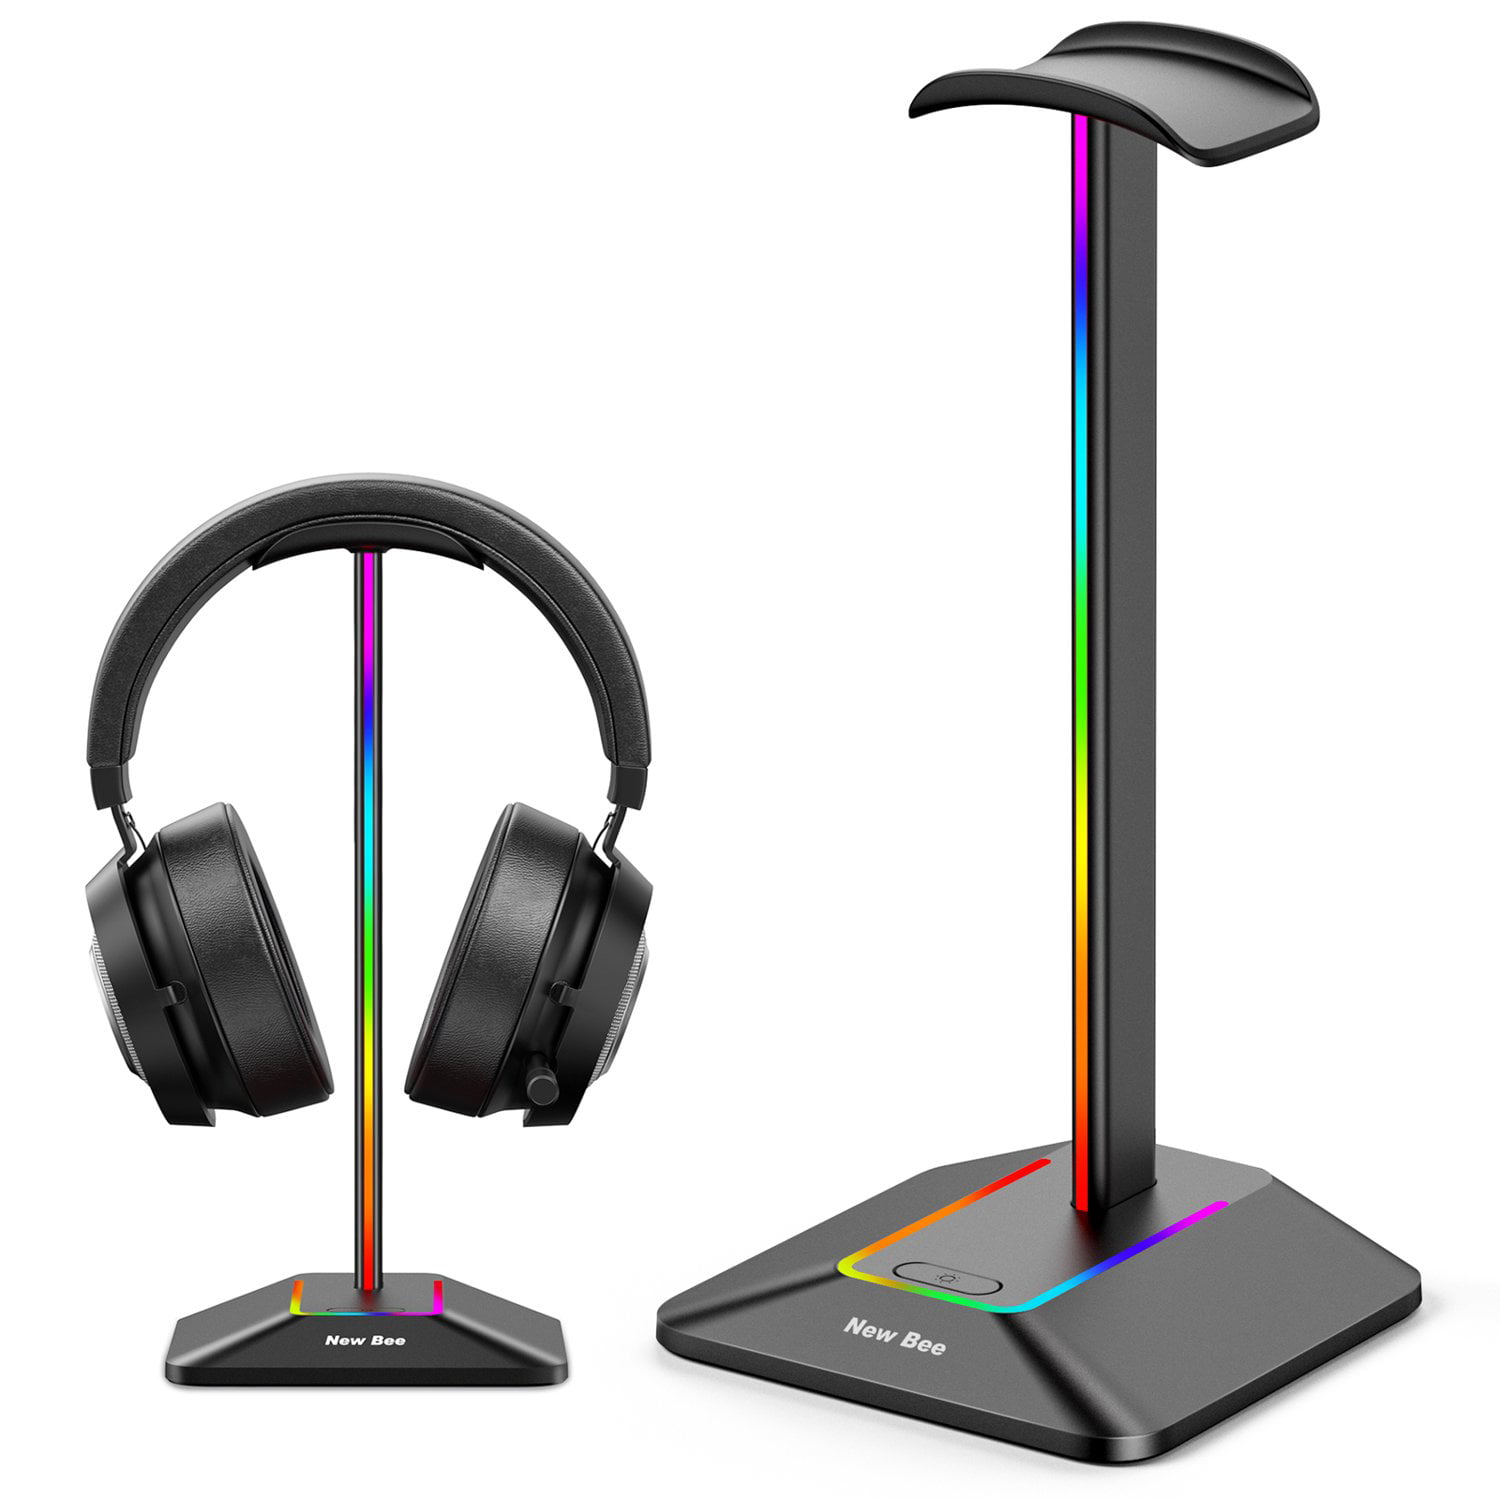 NEW BEE RGB Gaming Headphones Stand Headset Holder with Ports(USB /USB-C) -